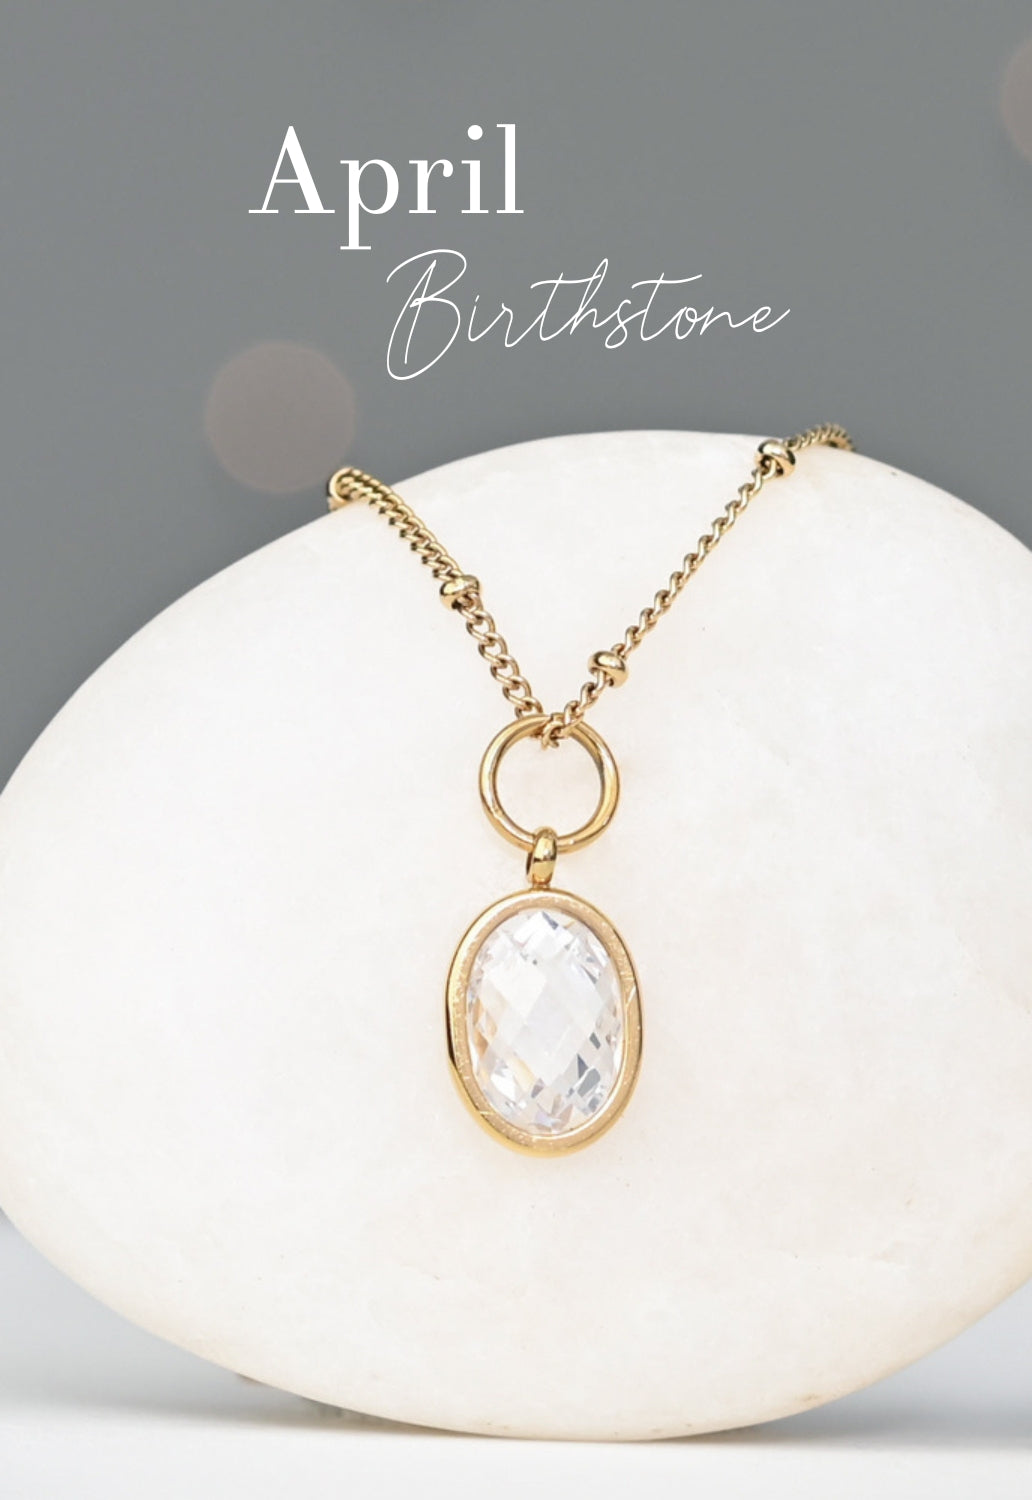 ChicSilver Women 925 Sterling Silver Cat Necklace November Birthstone  Jewelry Yellow Topaz Pendant Necklace Birthday Gift for Cat Lovers -  Walmart.com